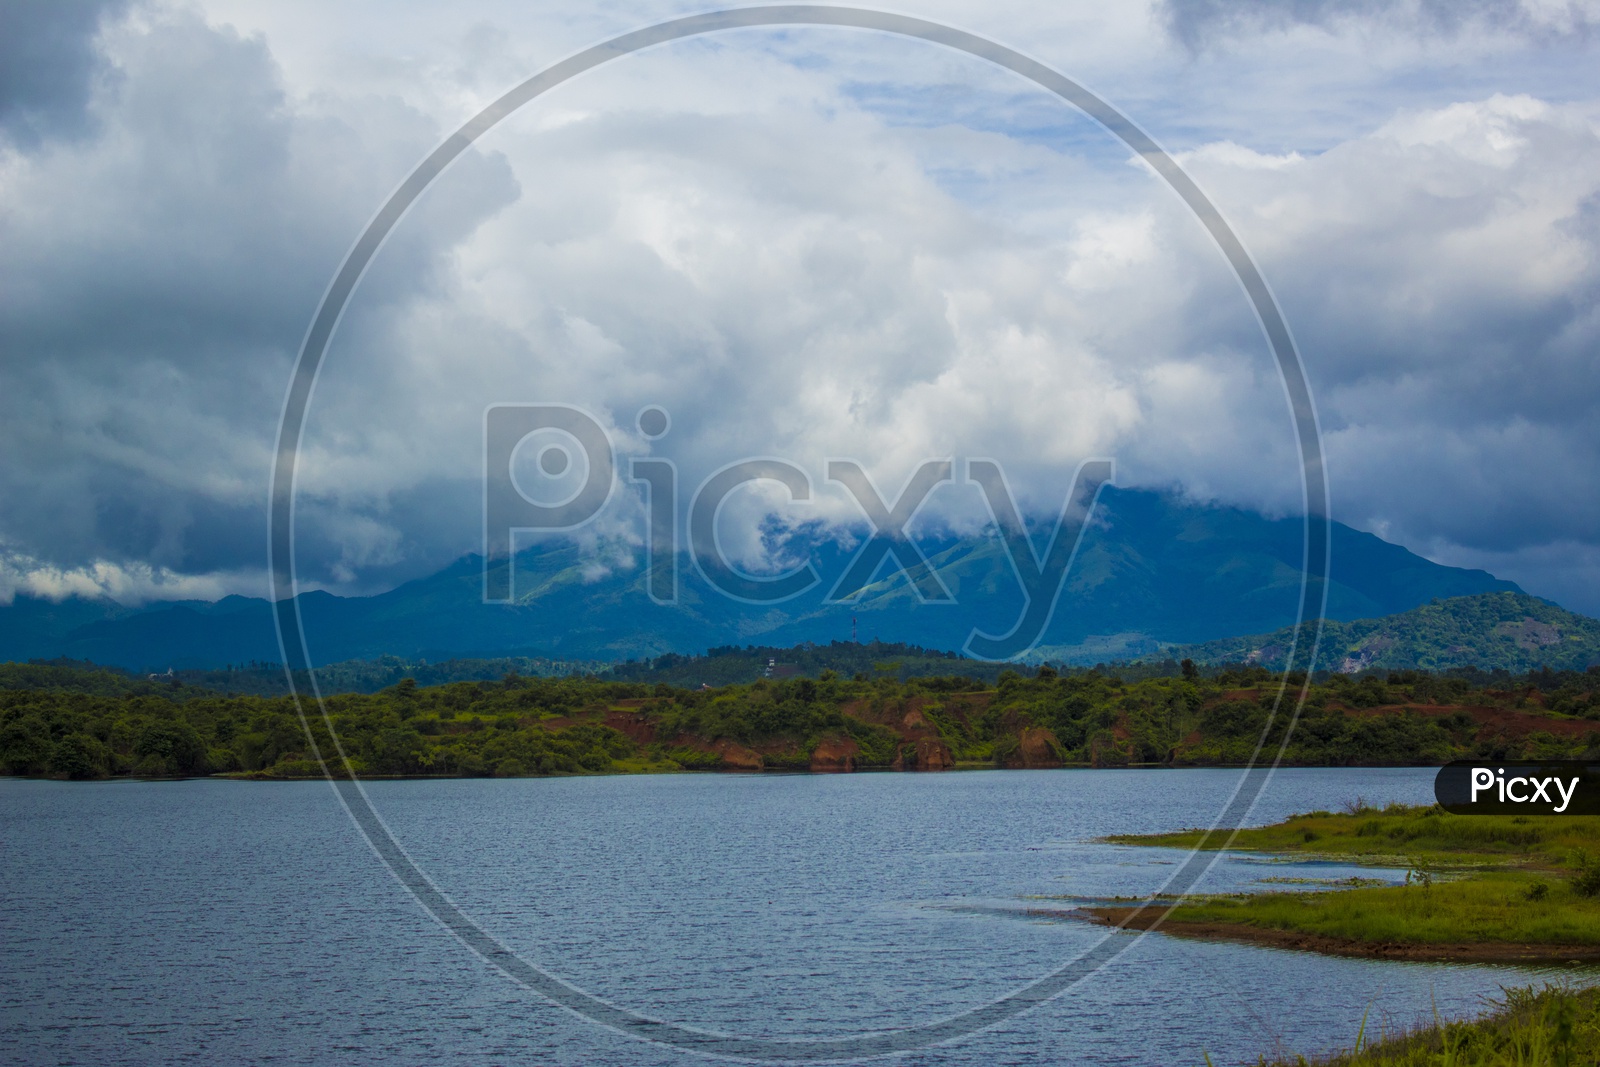 Lake view point.
This is one of the famous lakes in Kerala.
Photo taken in Kerala, India